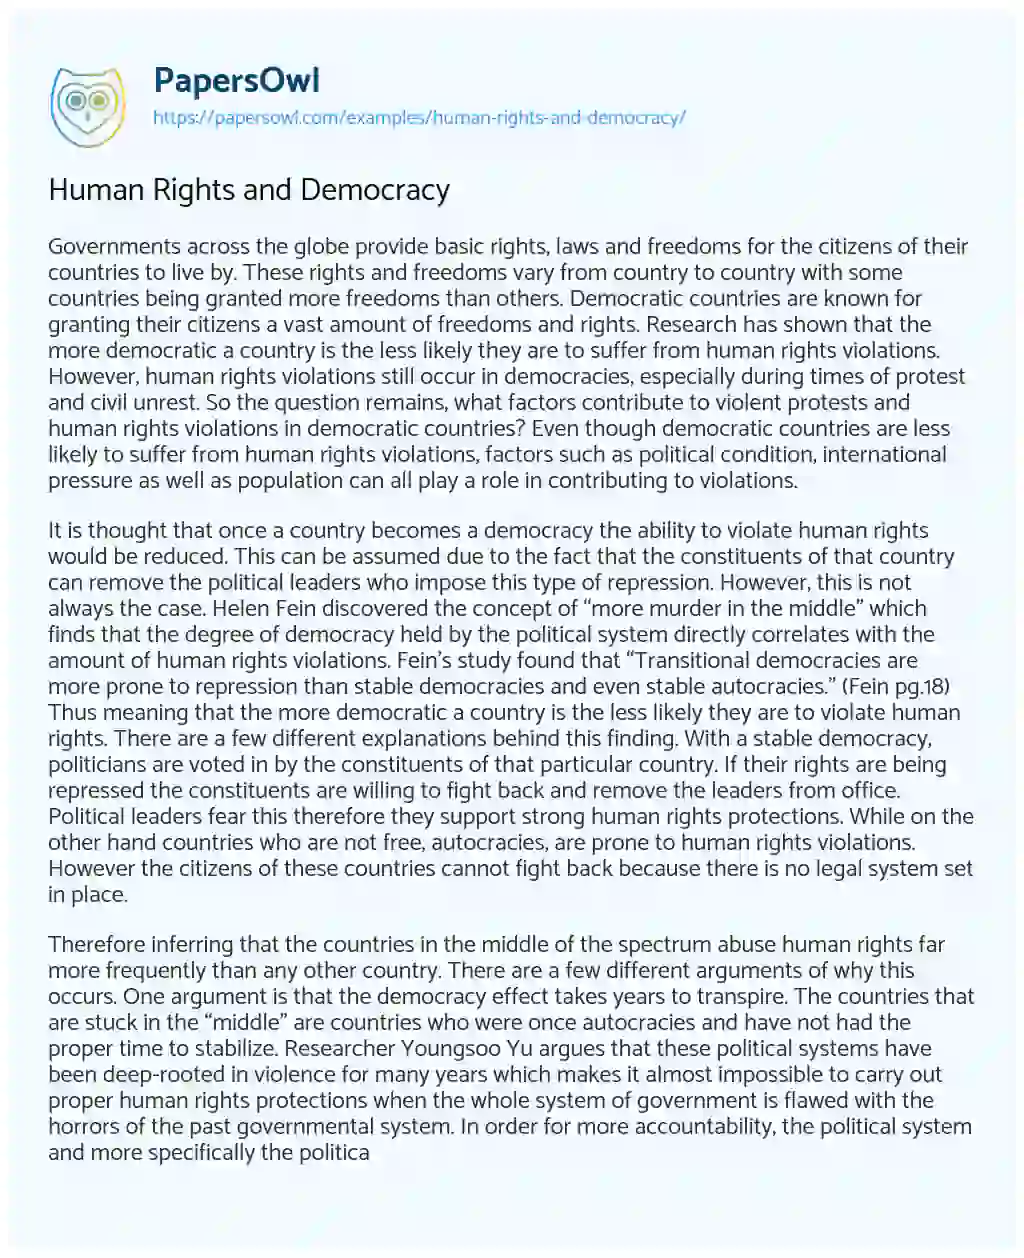 democracy and human rights essay